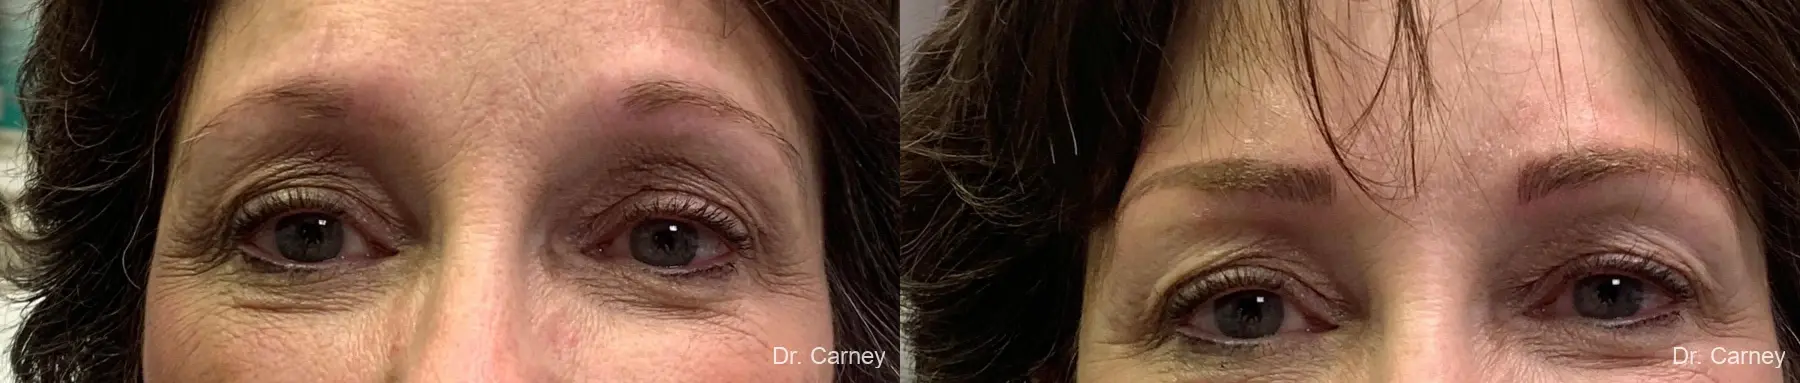 Microblading: Patient 3 - Before and After 1